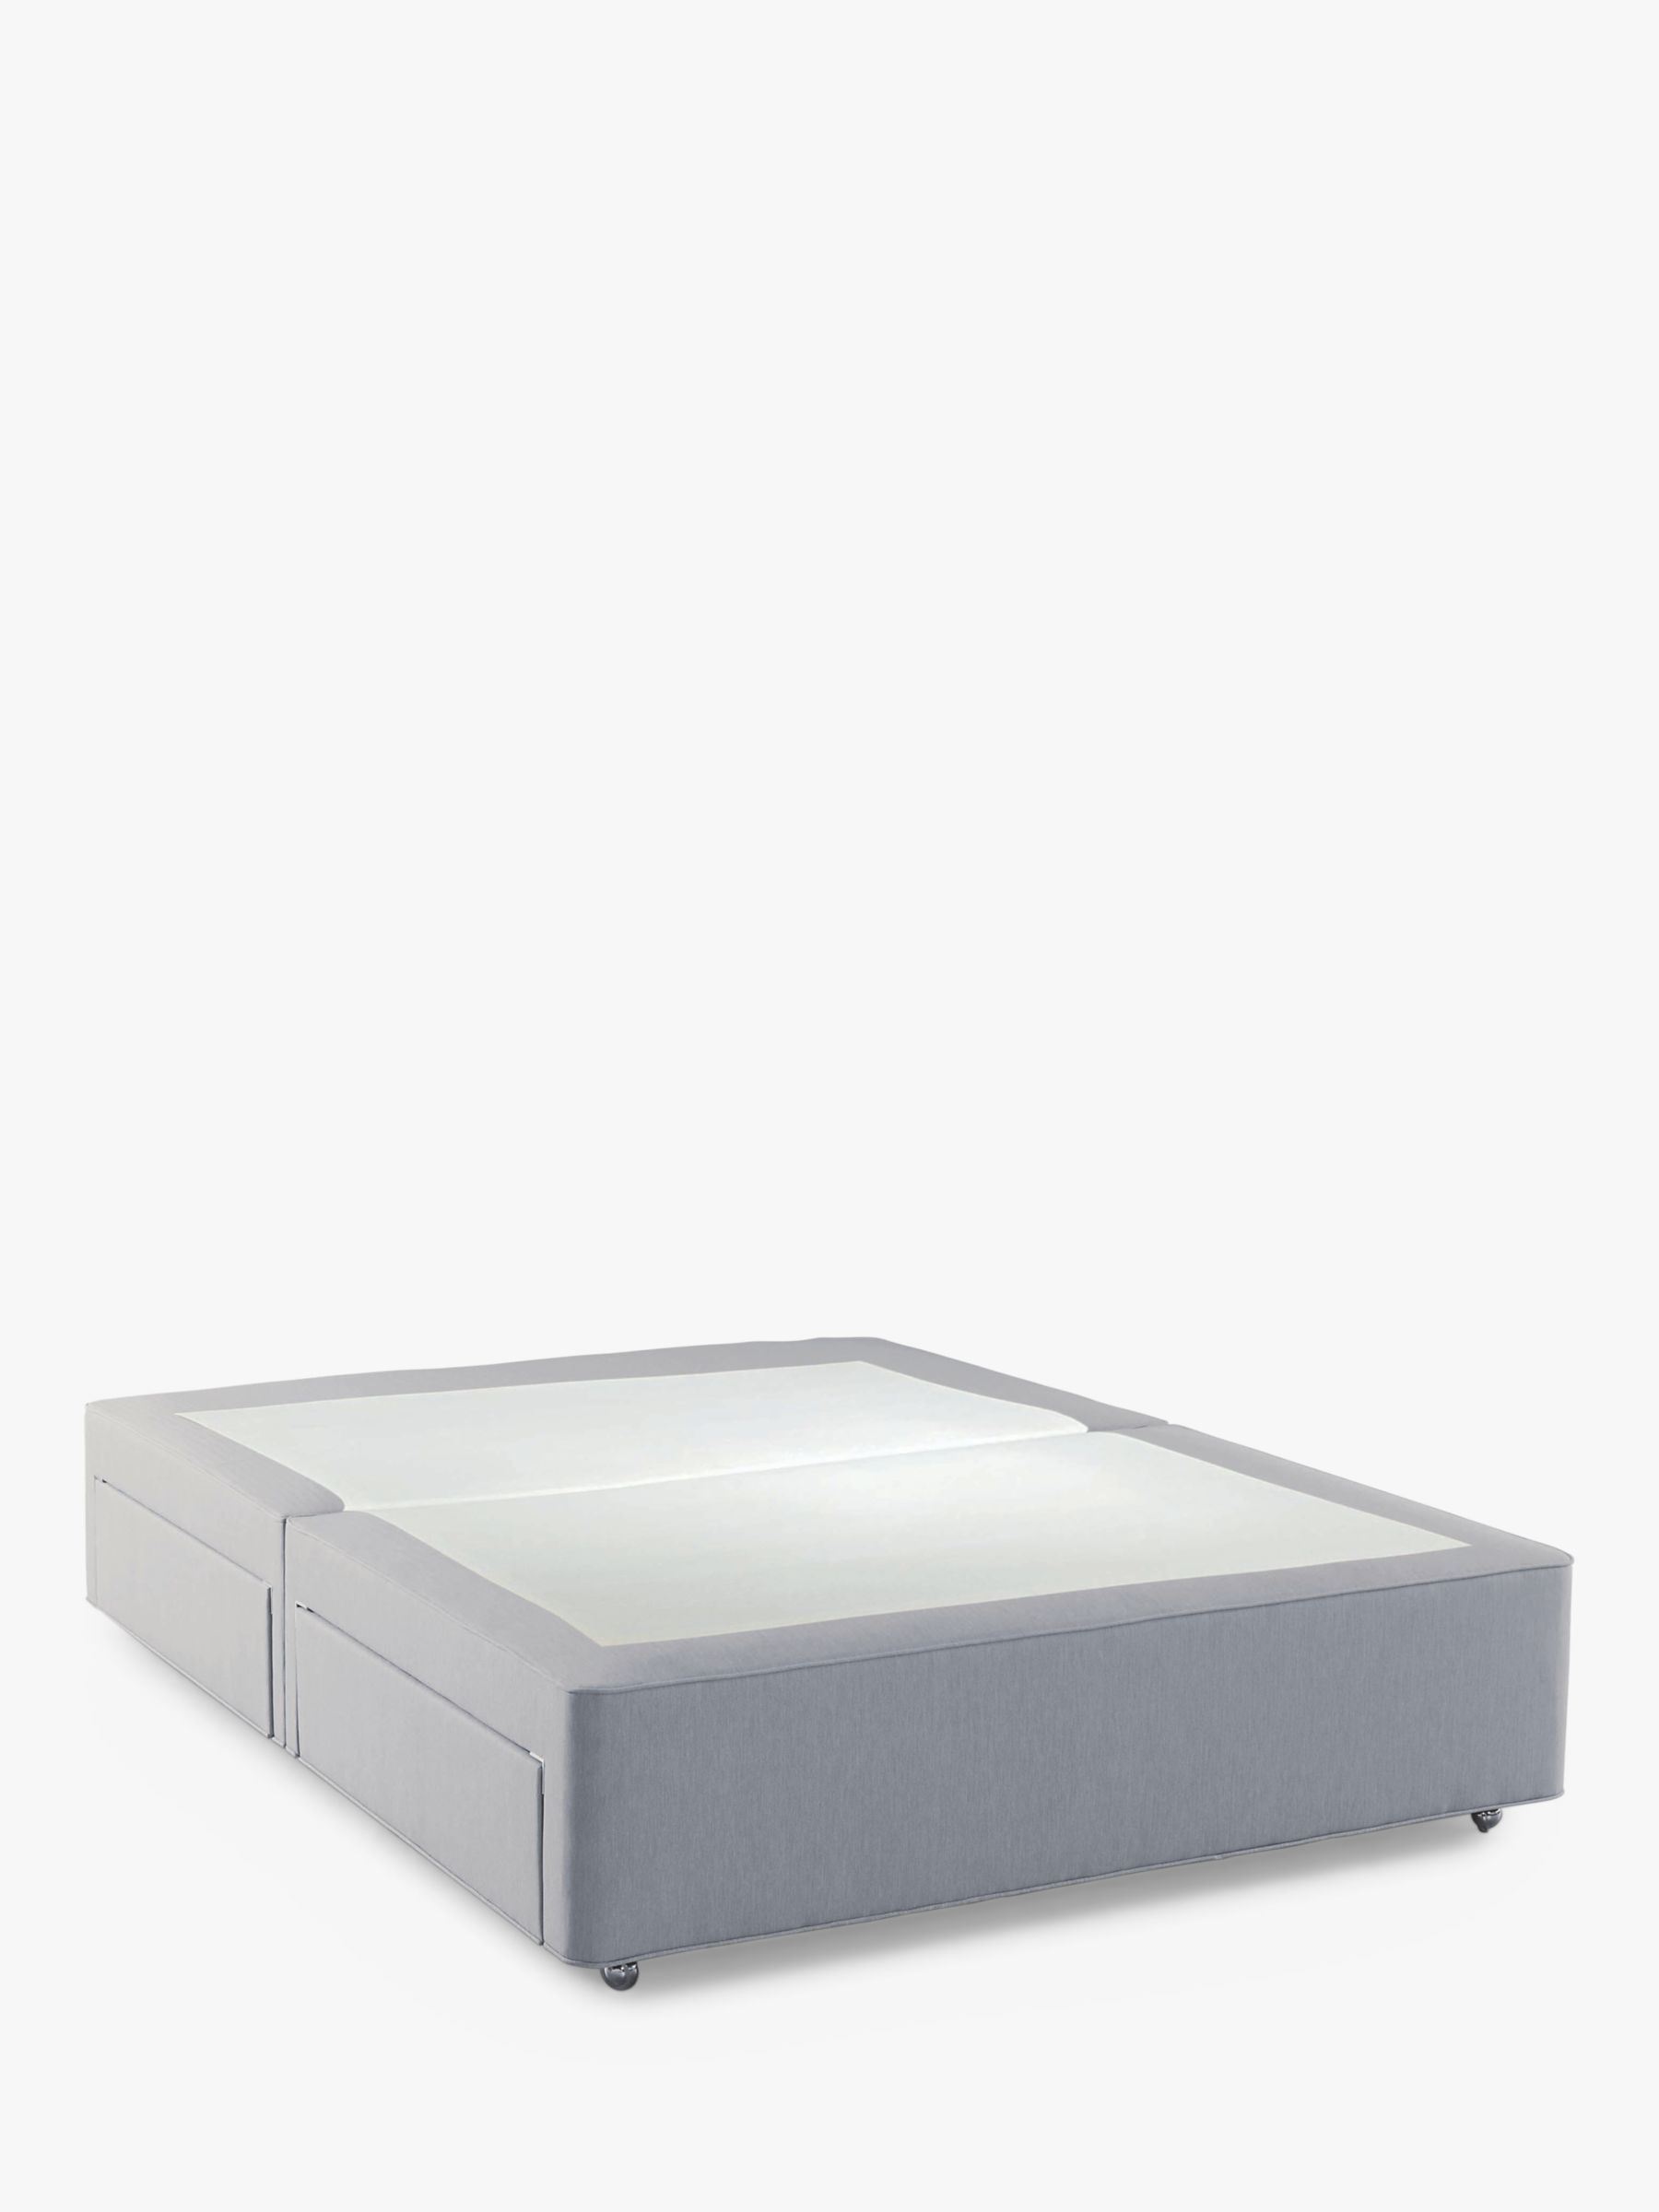 Photo of Hypnos firm edge 4 drawer divan storage bed double